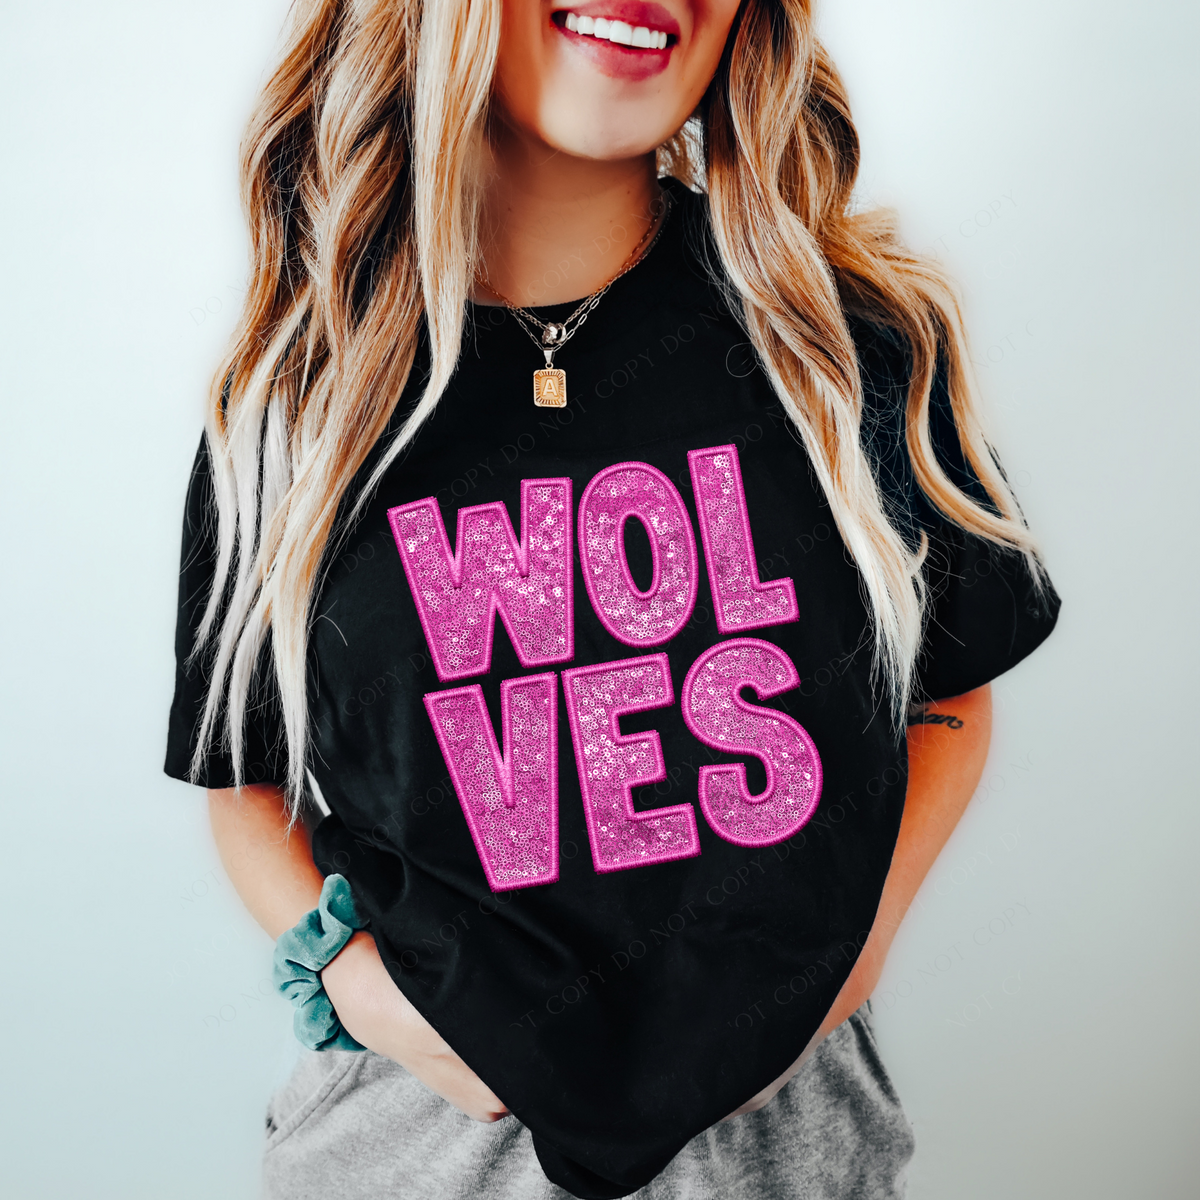 Wolves Embroidery & Sequin in Pink Mascot Digital Design, PNG